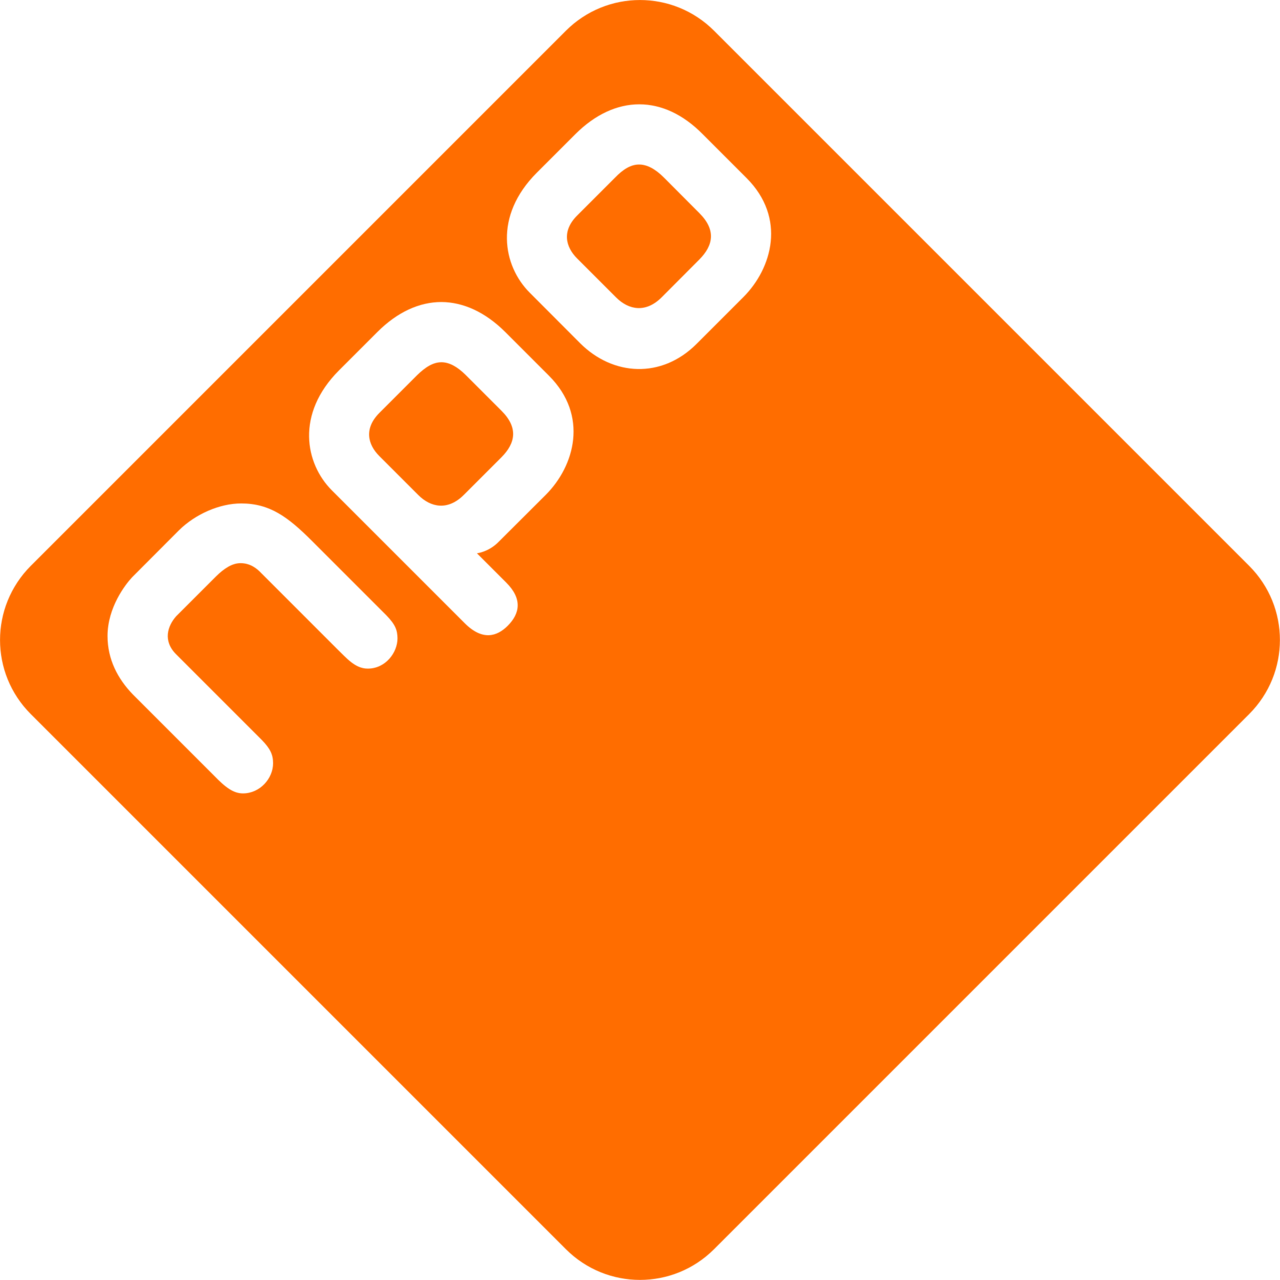 NPO netherlands channel